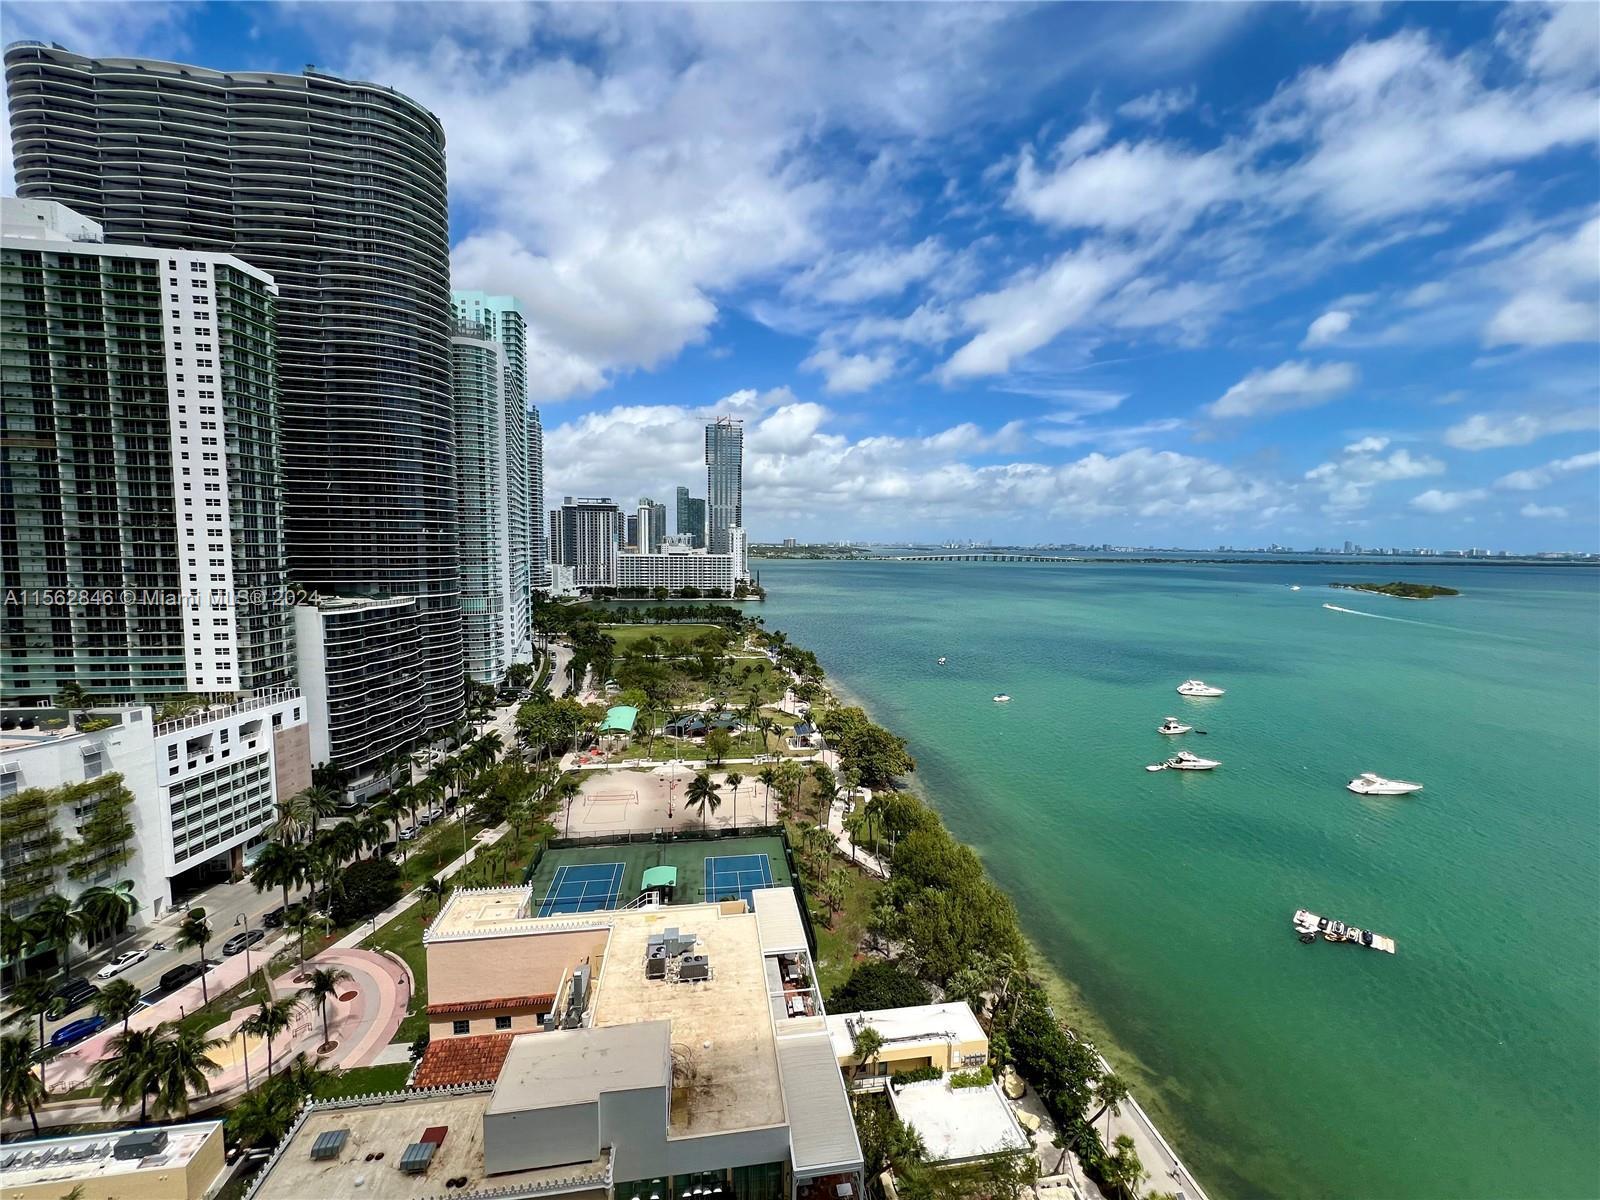 2/2 with den that can be easily converted to a 3rd bedroom with unobstructed views of Biscayne Bay. 